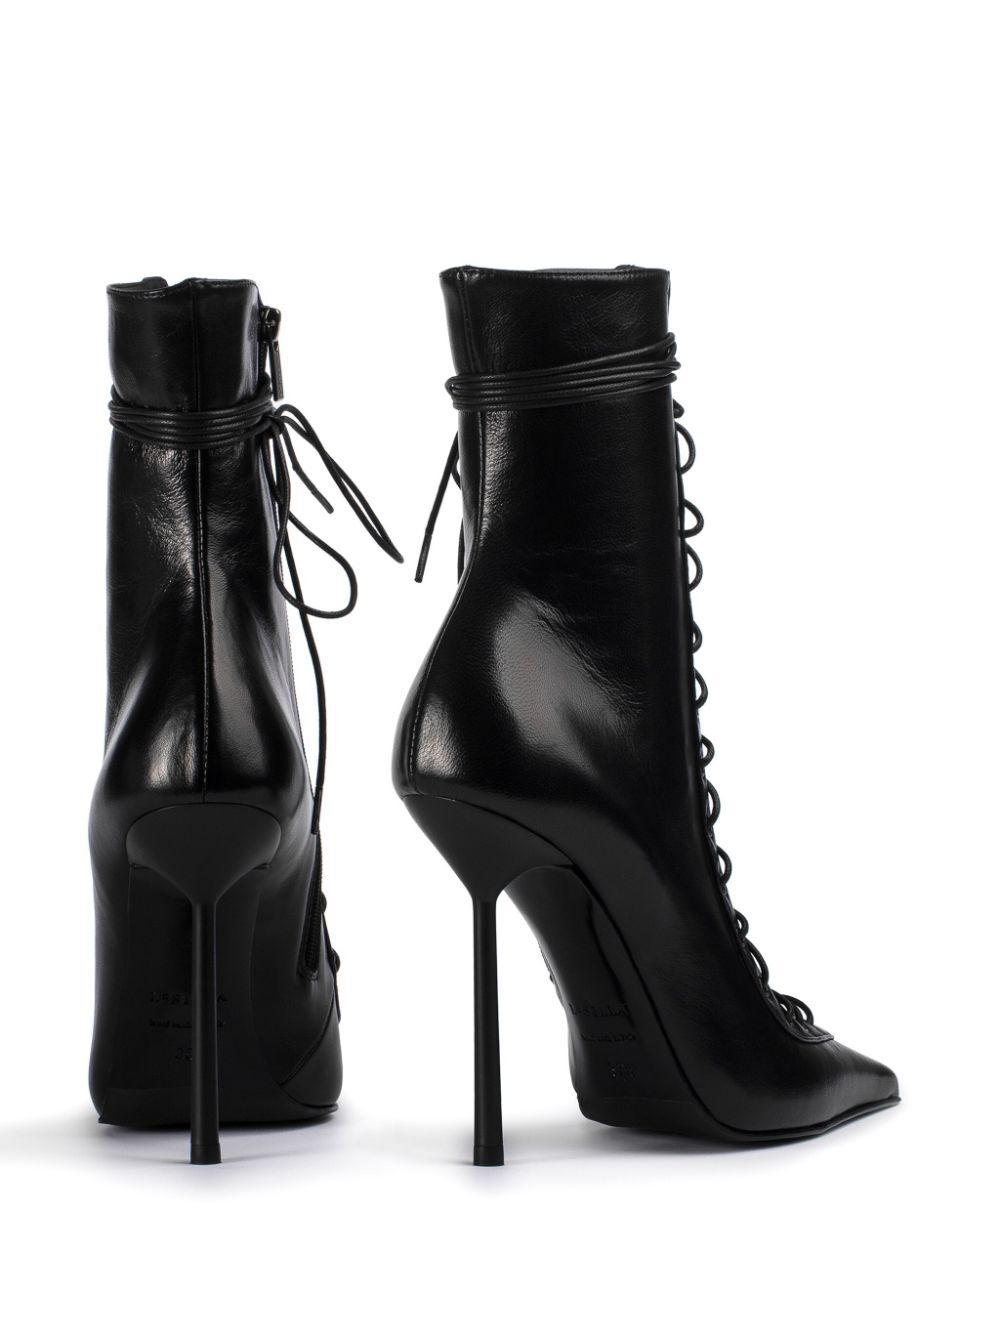 Colette 120mm ankle boots